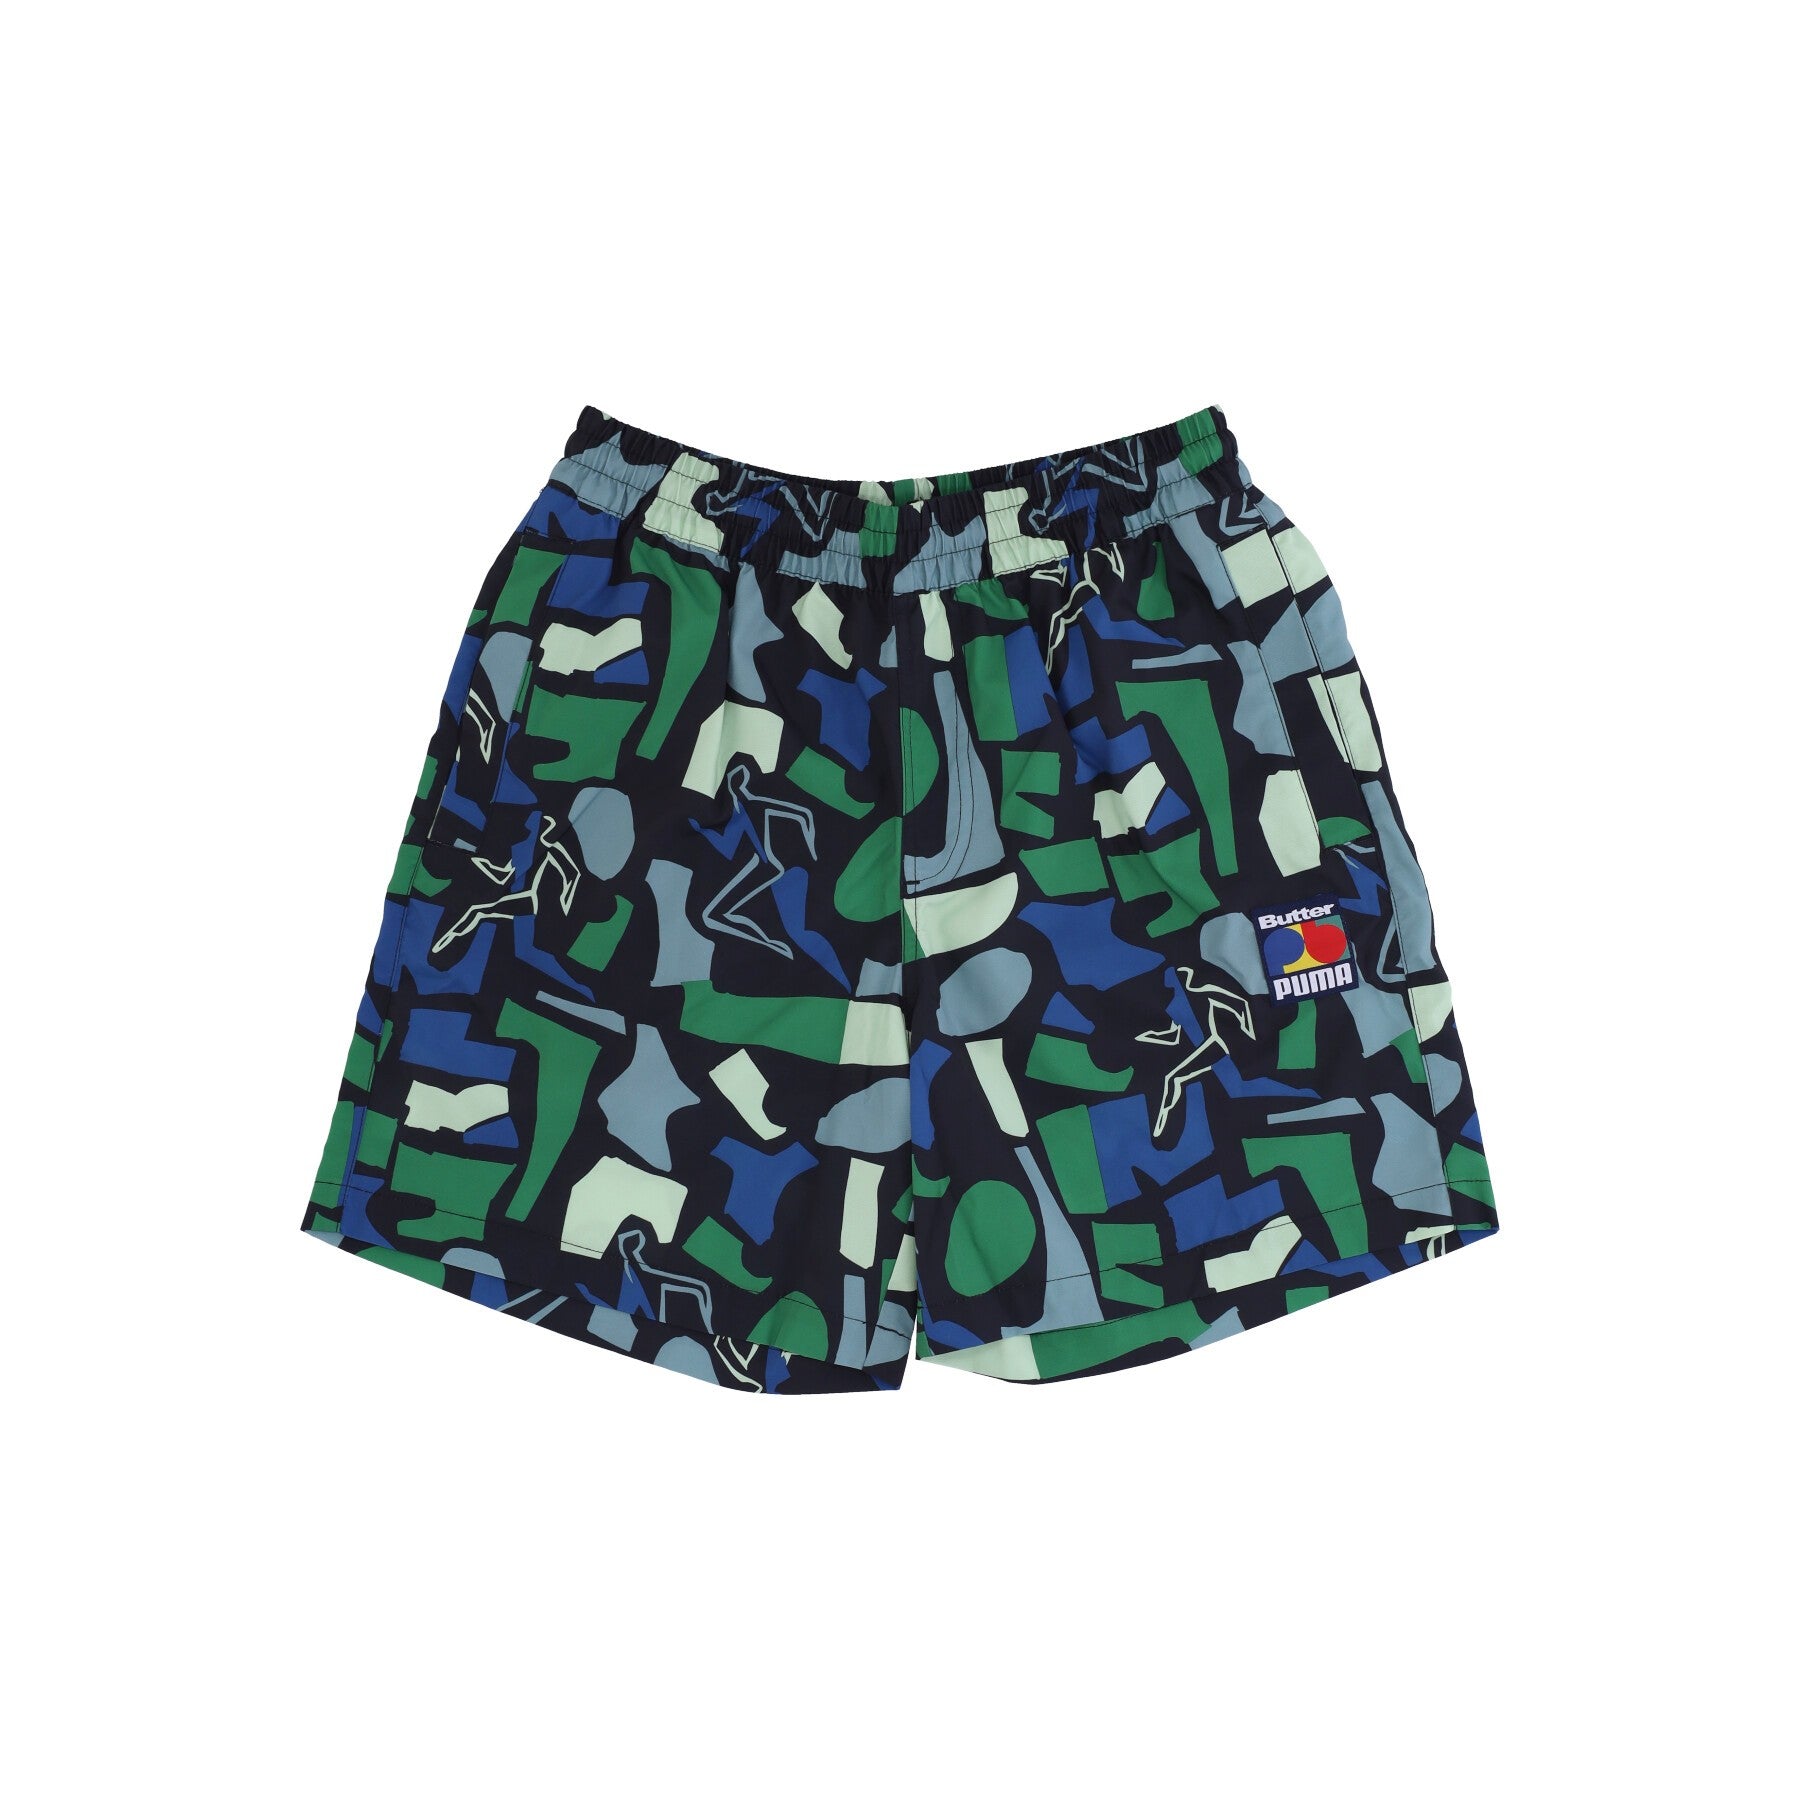 Puma, Pantaloncino Uomo All Over Print Shorts X Butter Goods, Mineral Blue